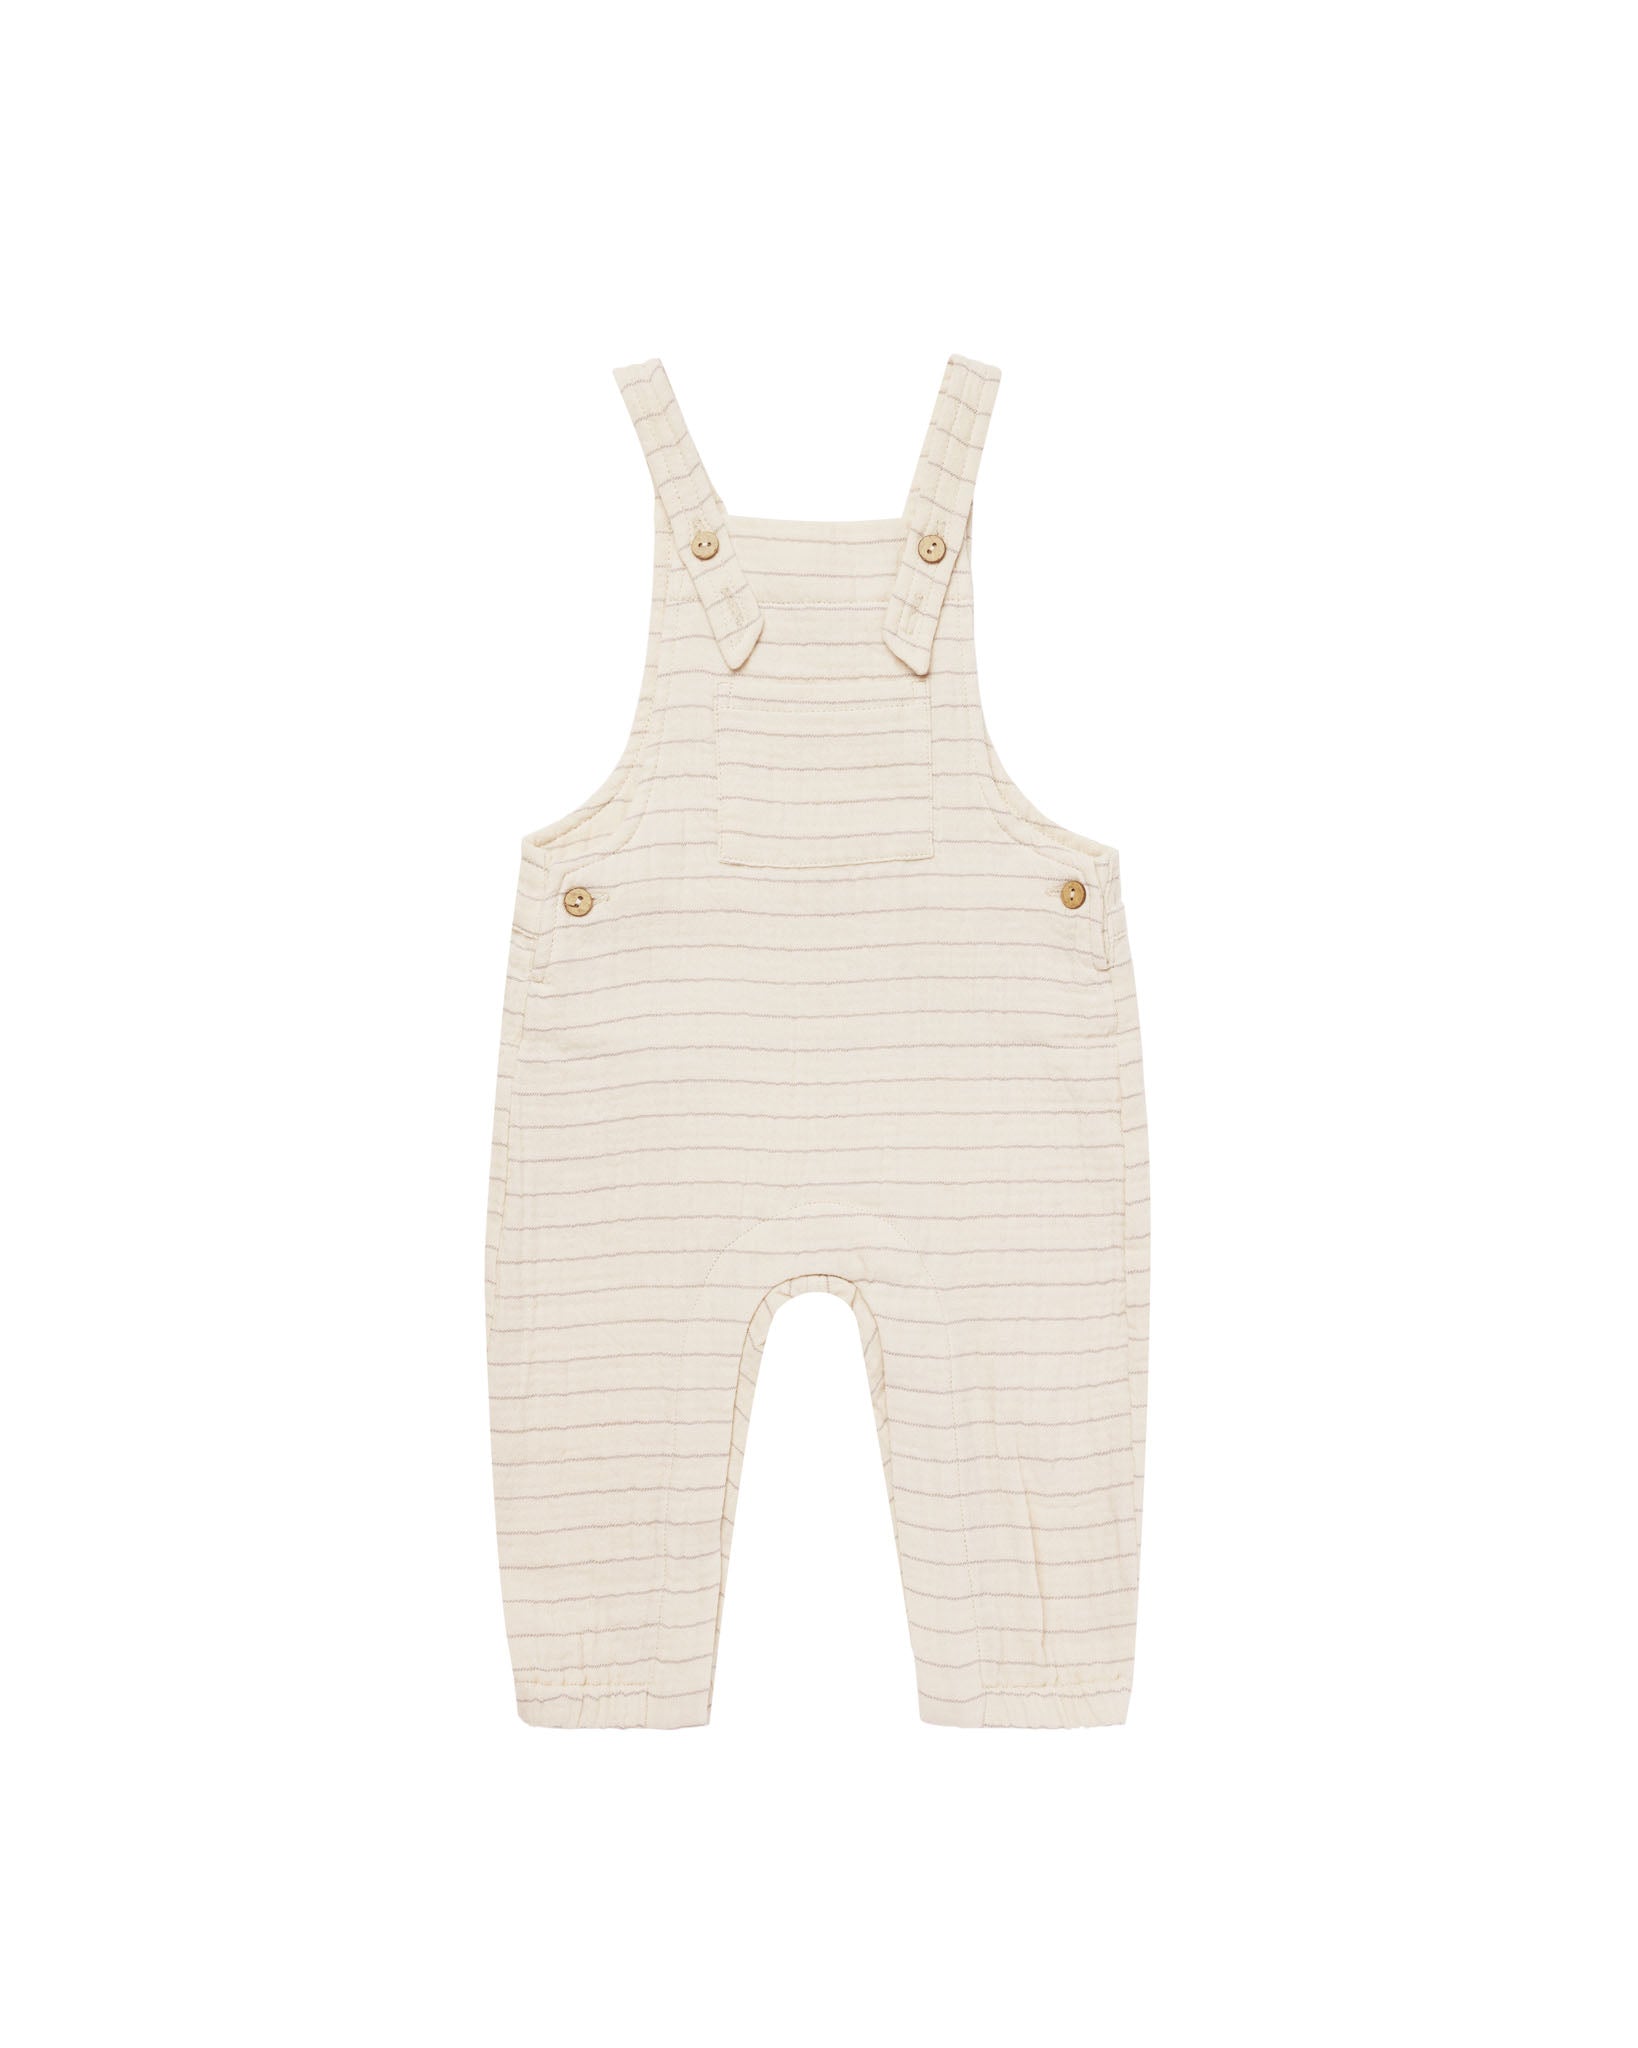 Baby Overall | Dusty Blue Stripe